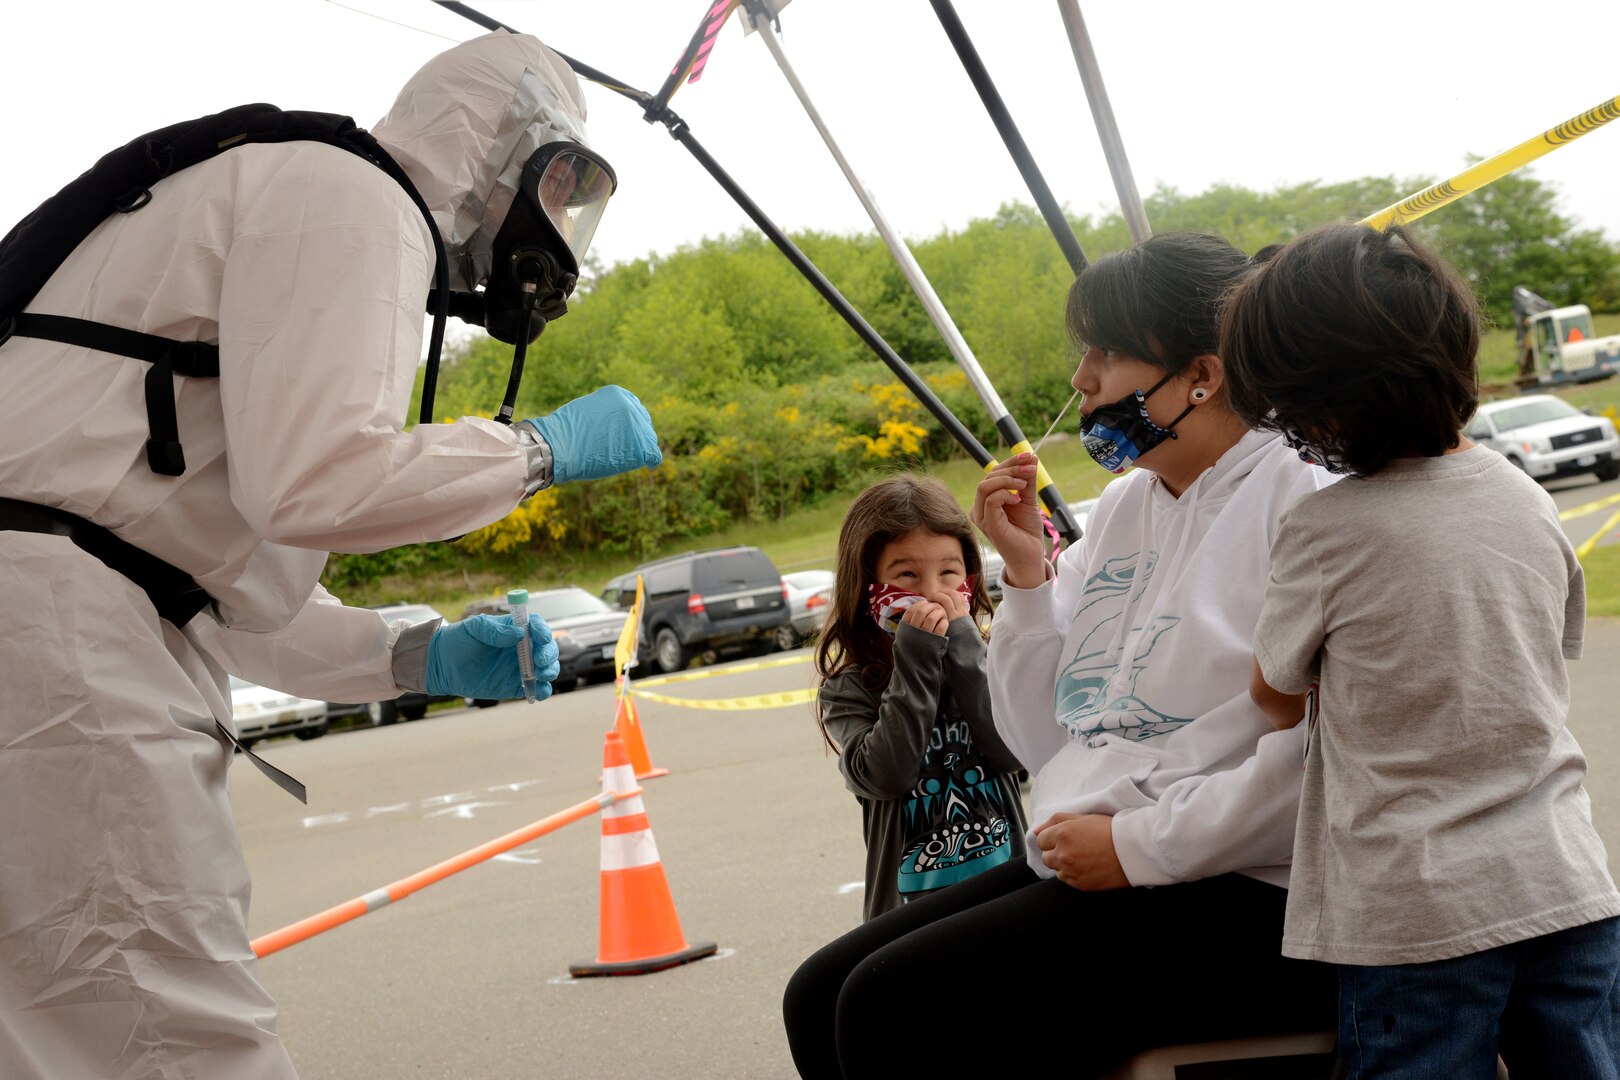 Senior Airman Nathan Kepple, left, a medic assigned to the 141st Air Refueling Wing Medical Group, tests Lia Frenchman for COVID-19 as her children watch at a site established by the Washington National Guard on the Quinault Indian Nation Reservation, Taholah, Wash., May 20, 2020.